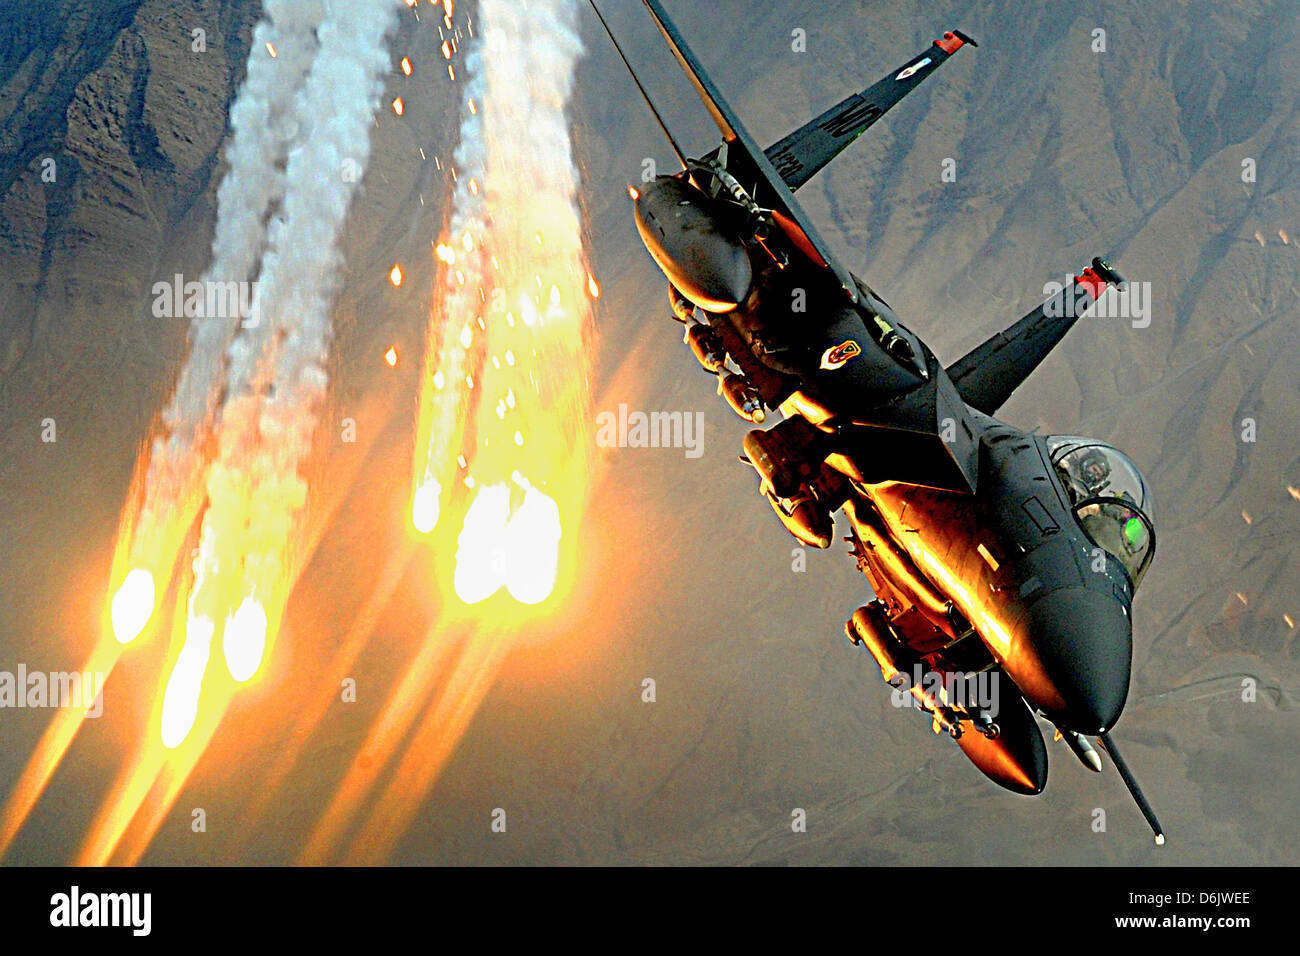 A US Air Force F-15E Strike Eagle fighter aircraft launches heat decoys during a close-air-support mission December 15, 2008 over Afghanistan. Stock Photo